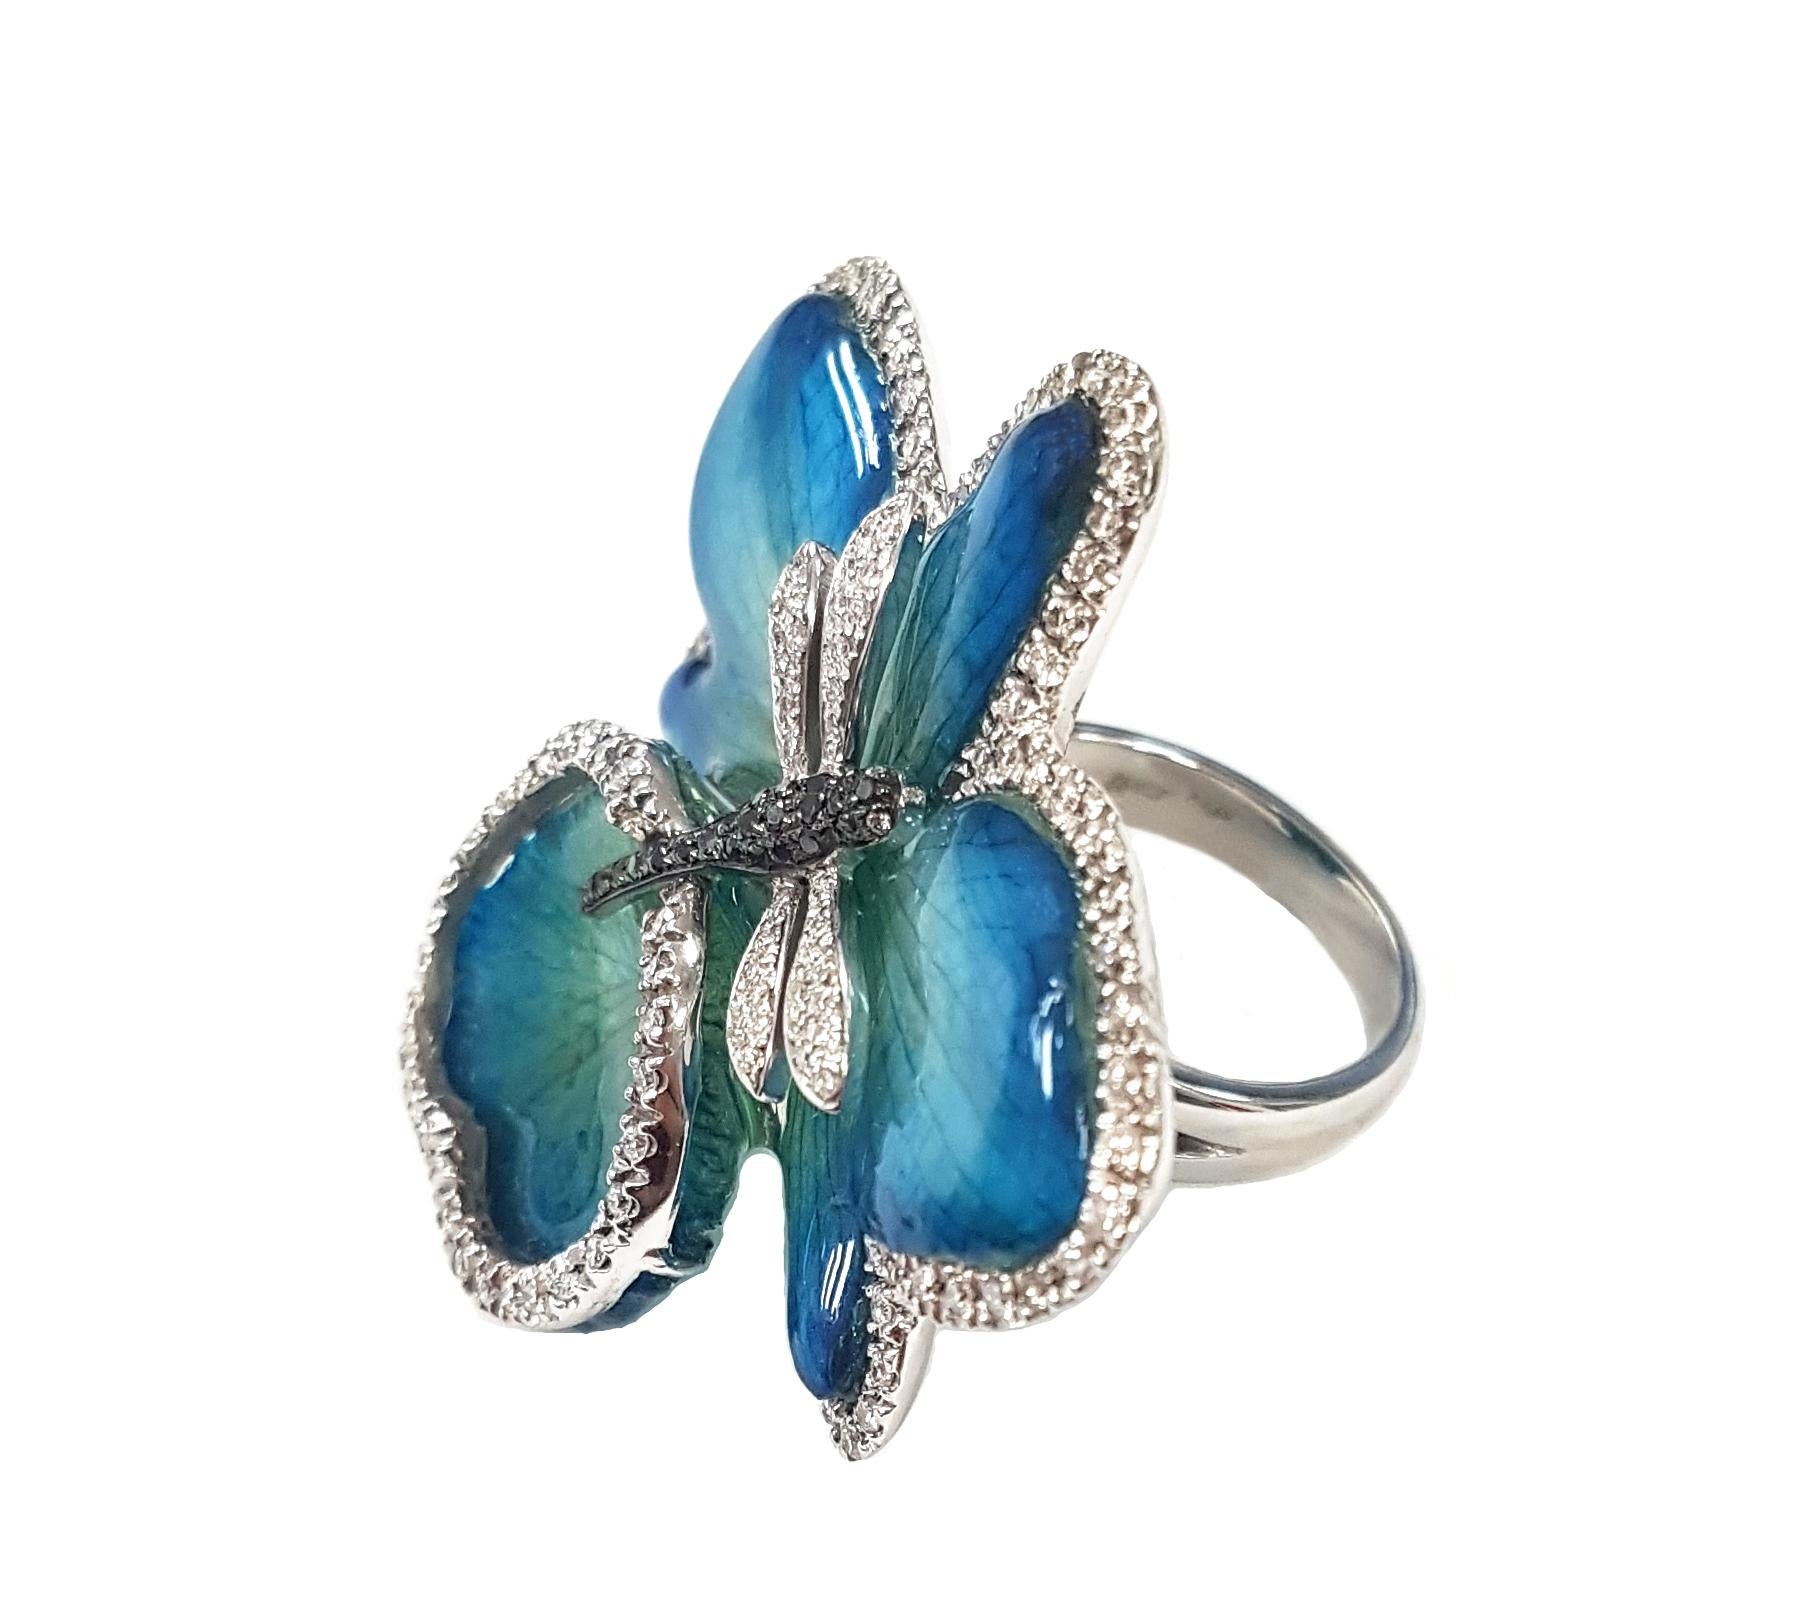 A stunning dragonfly and orchid-flower cocktail ring masterfully created entirely by hand from 18-karat white gold and featuring the entire bloom of a real orchid. Each petal of the orchid is framed by a row of brilliant white diamonds. The